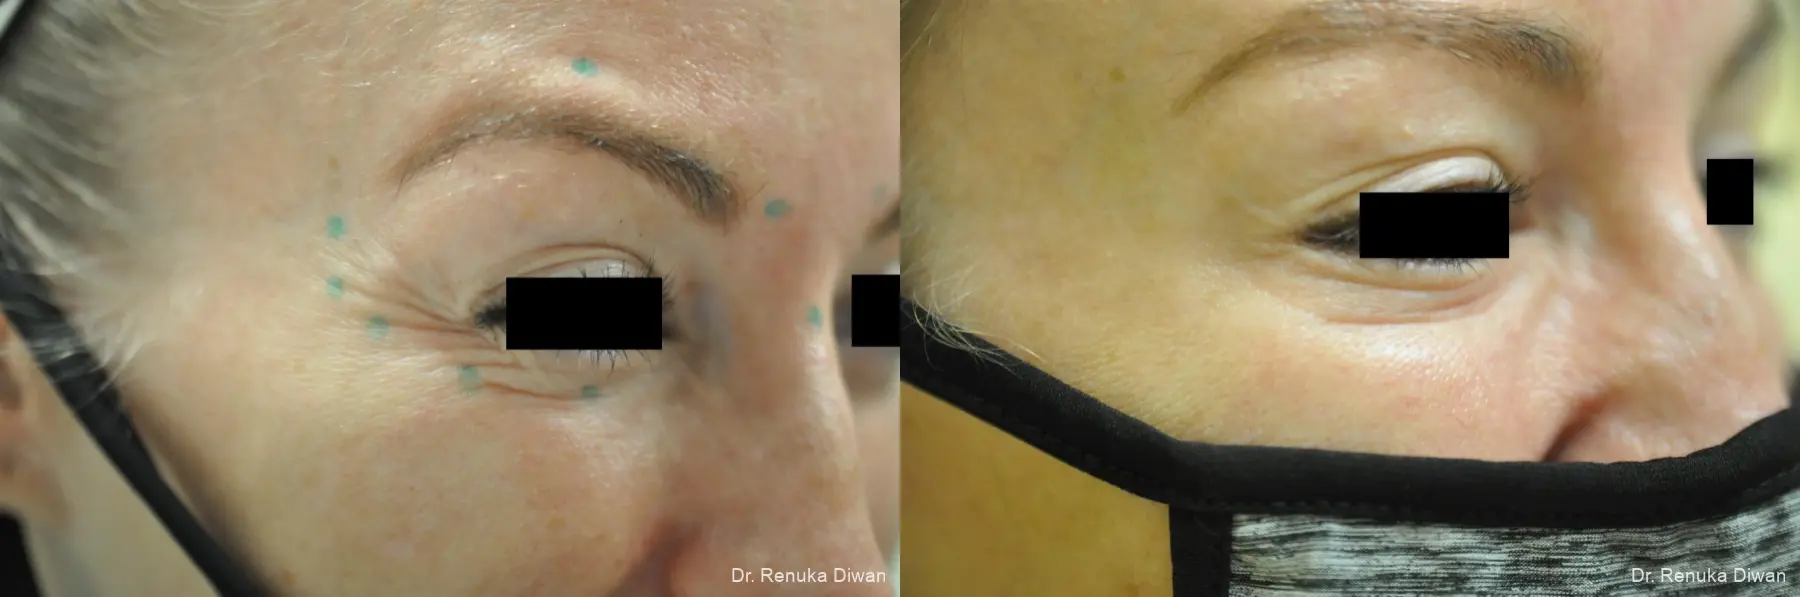 Crows Feet Creases: Patient 6 - Before and After 1